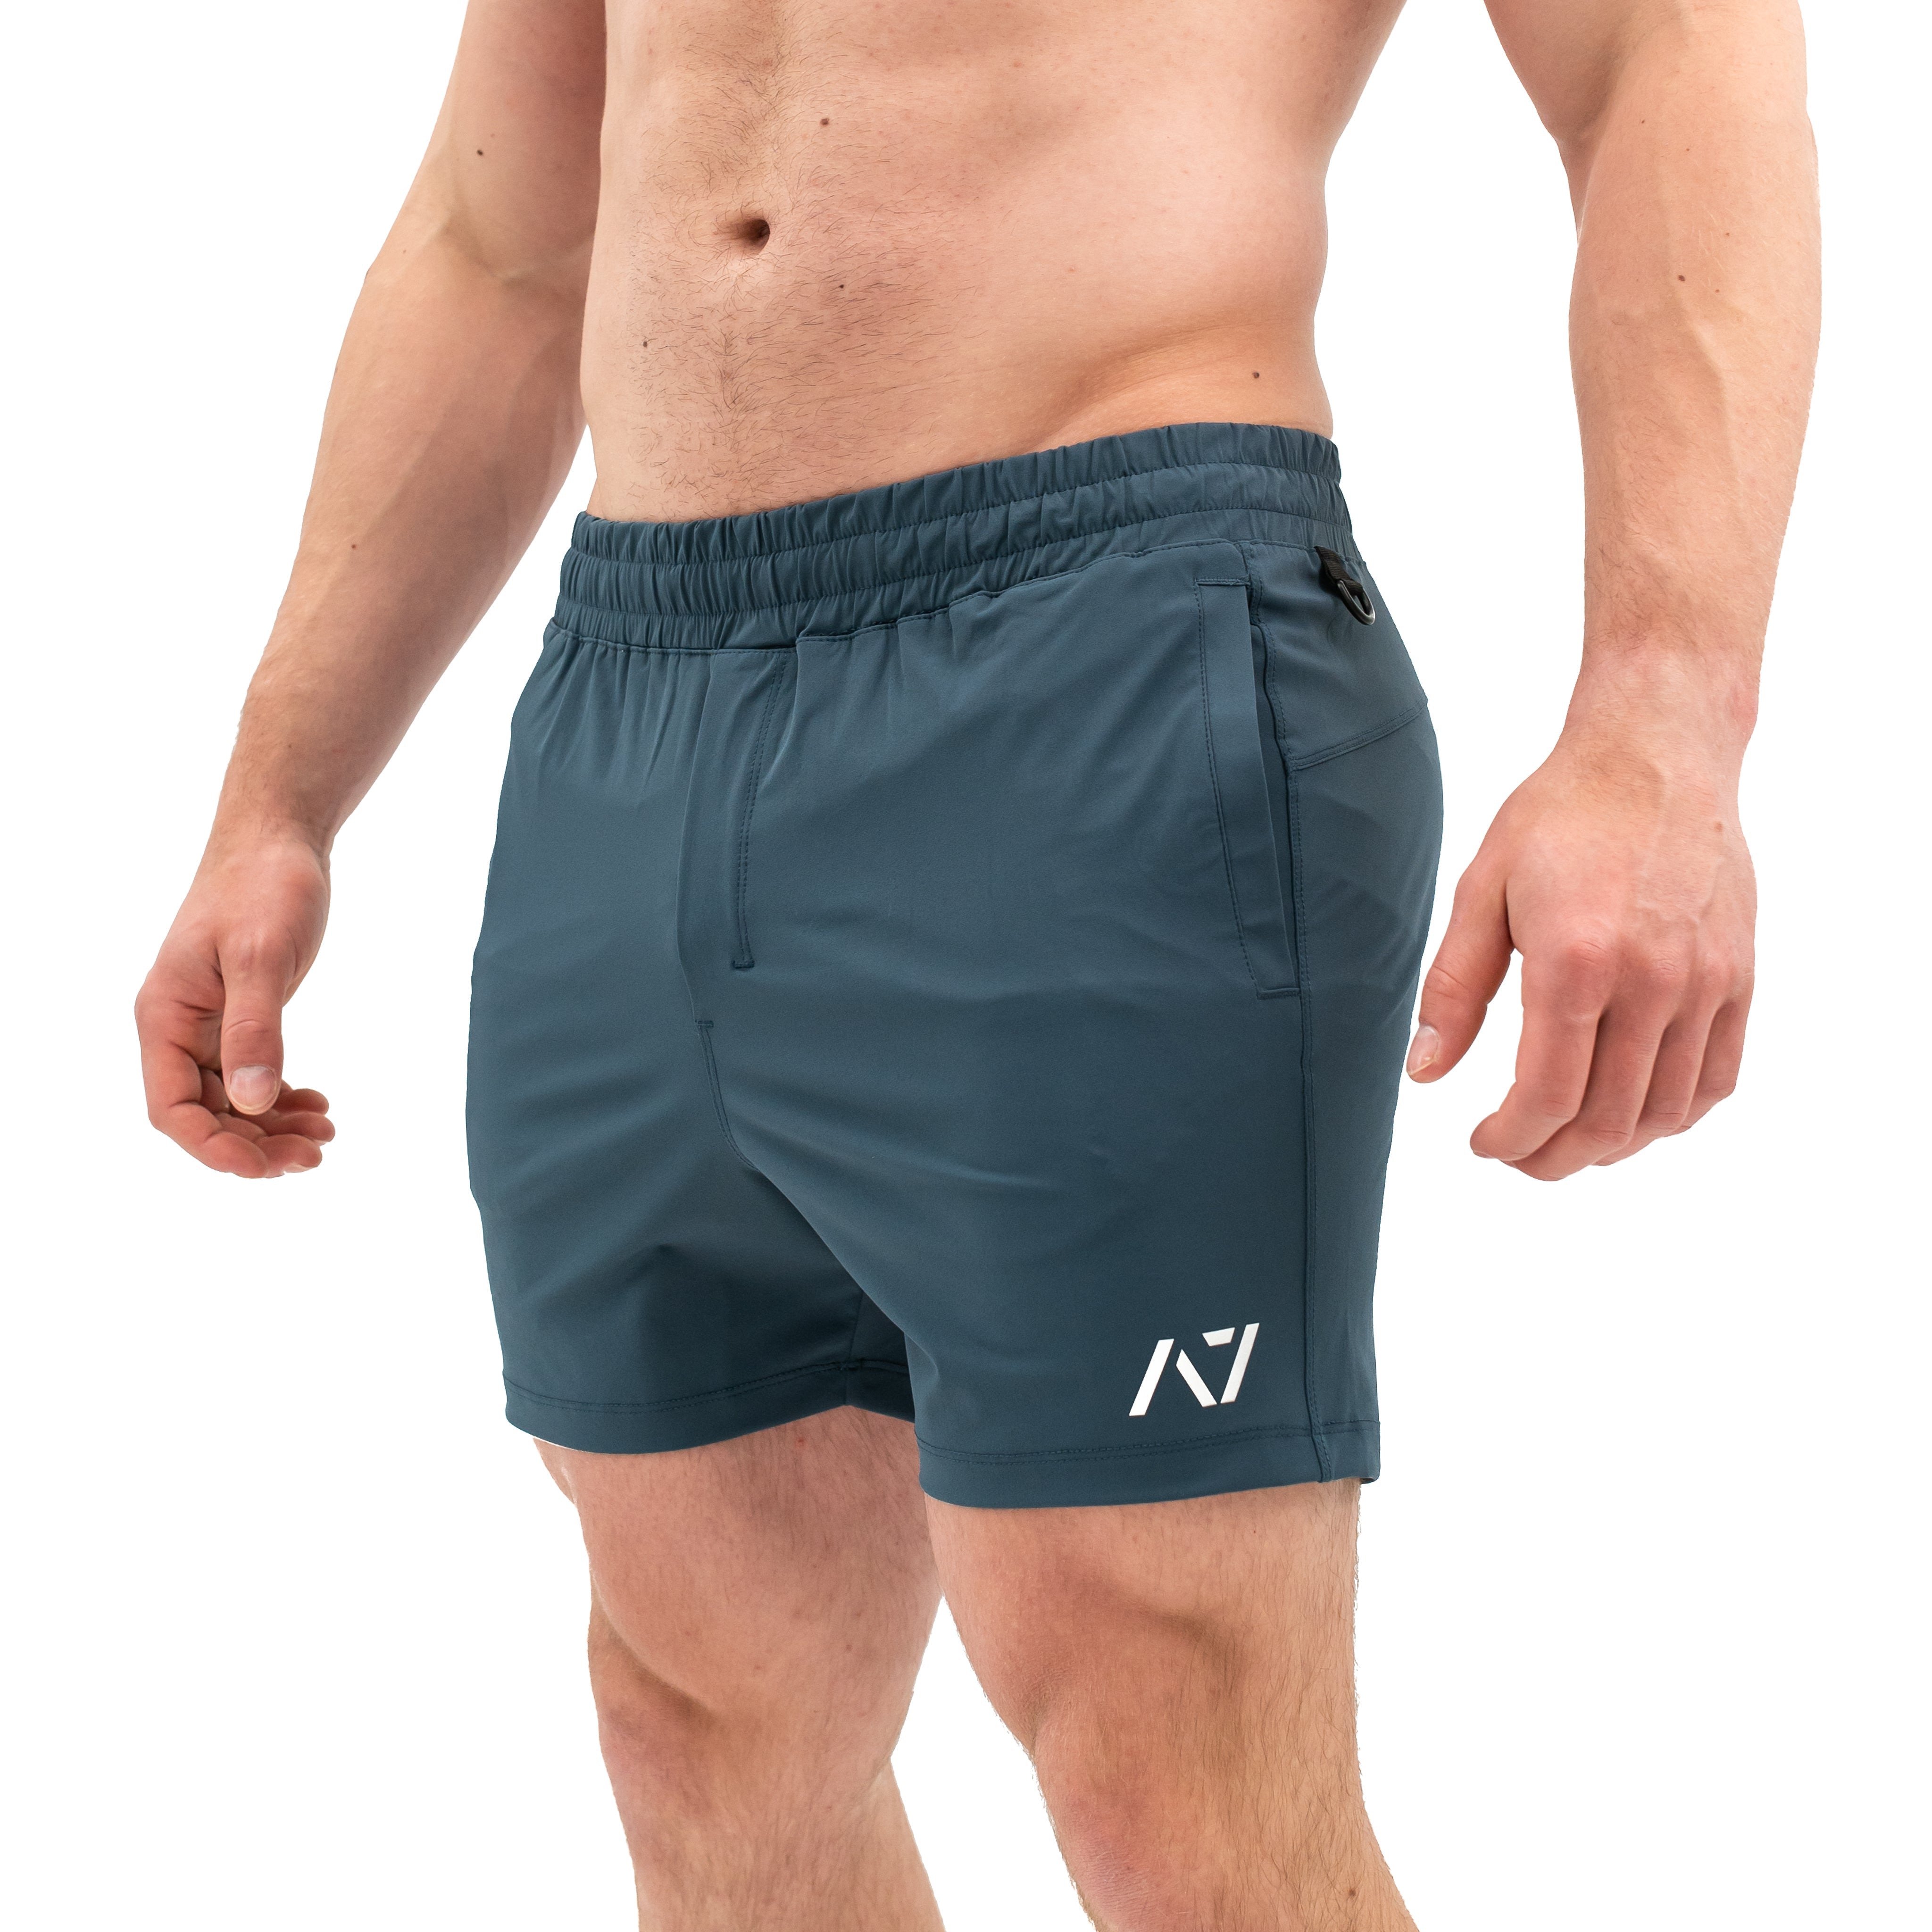 Steel 360-GO KWD shorts were created to provide the flexibility for all the movements in your training while offering the comfort and fit you have come to love through our KWD shorts. Purchase 360-GO KWD shorts from A7 UK and A7 Europe. 360-GO KWD shorts are perfect for powerlifting and weightlifting training. Available in UK and Europe including France, Italy, Germany, the Netherlands, Sweden and Poland.